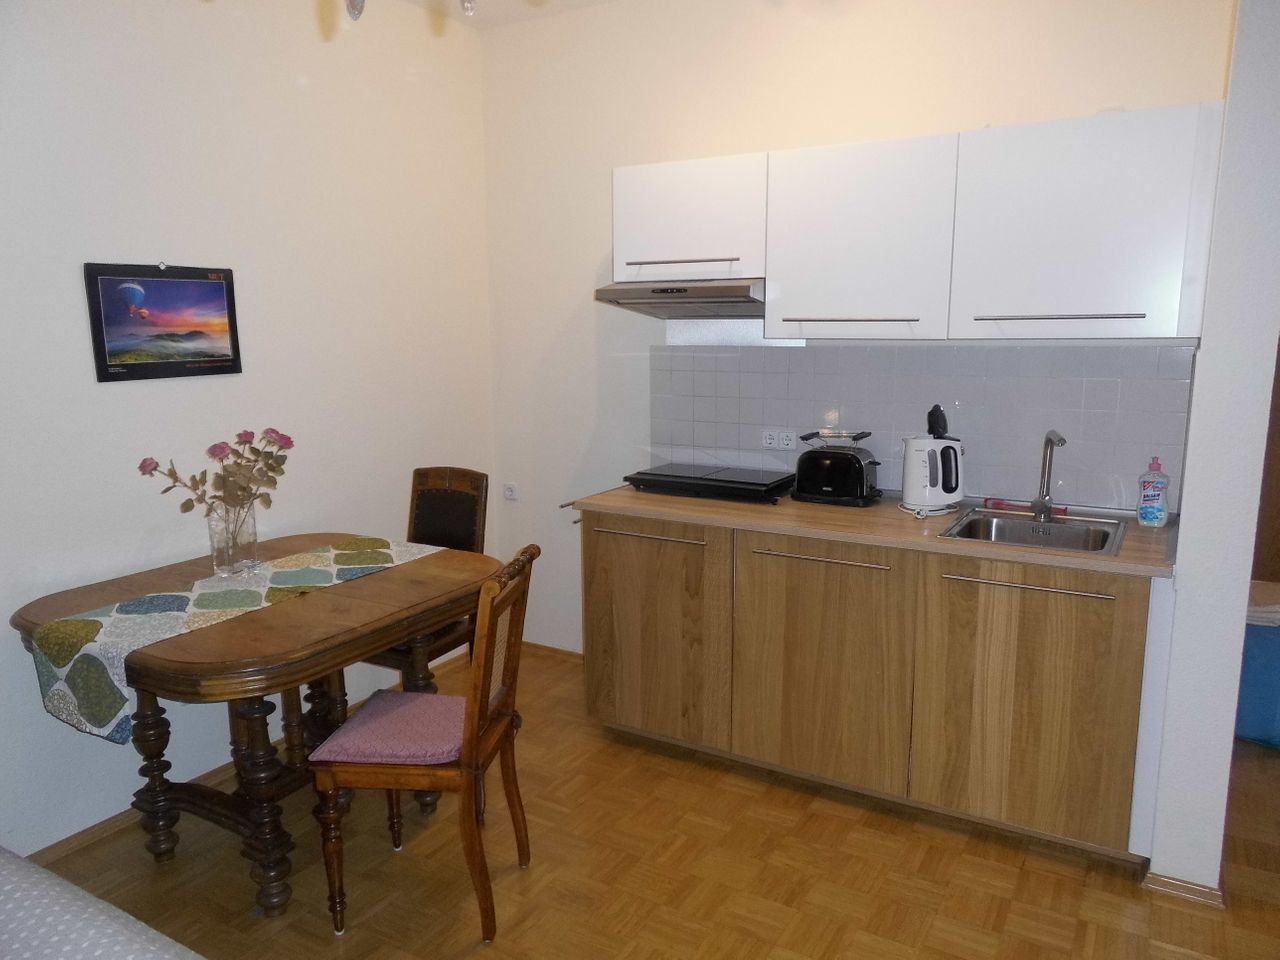 Top apartment in absolute prime location in the center of Leipzig: in 10 minutes walk through the Clara Park in the city center (WE03).